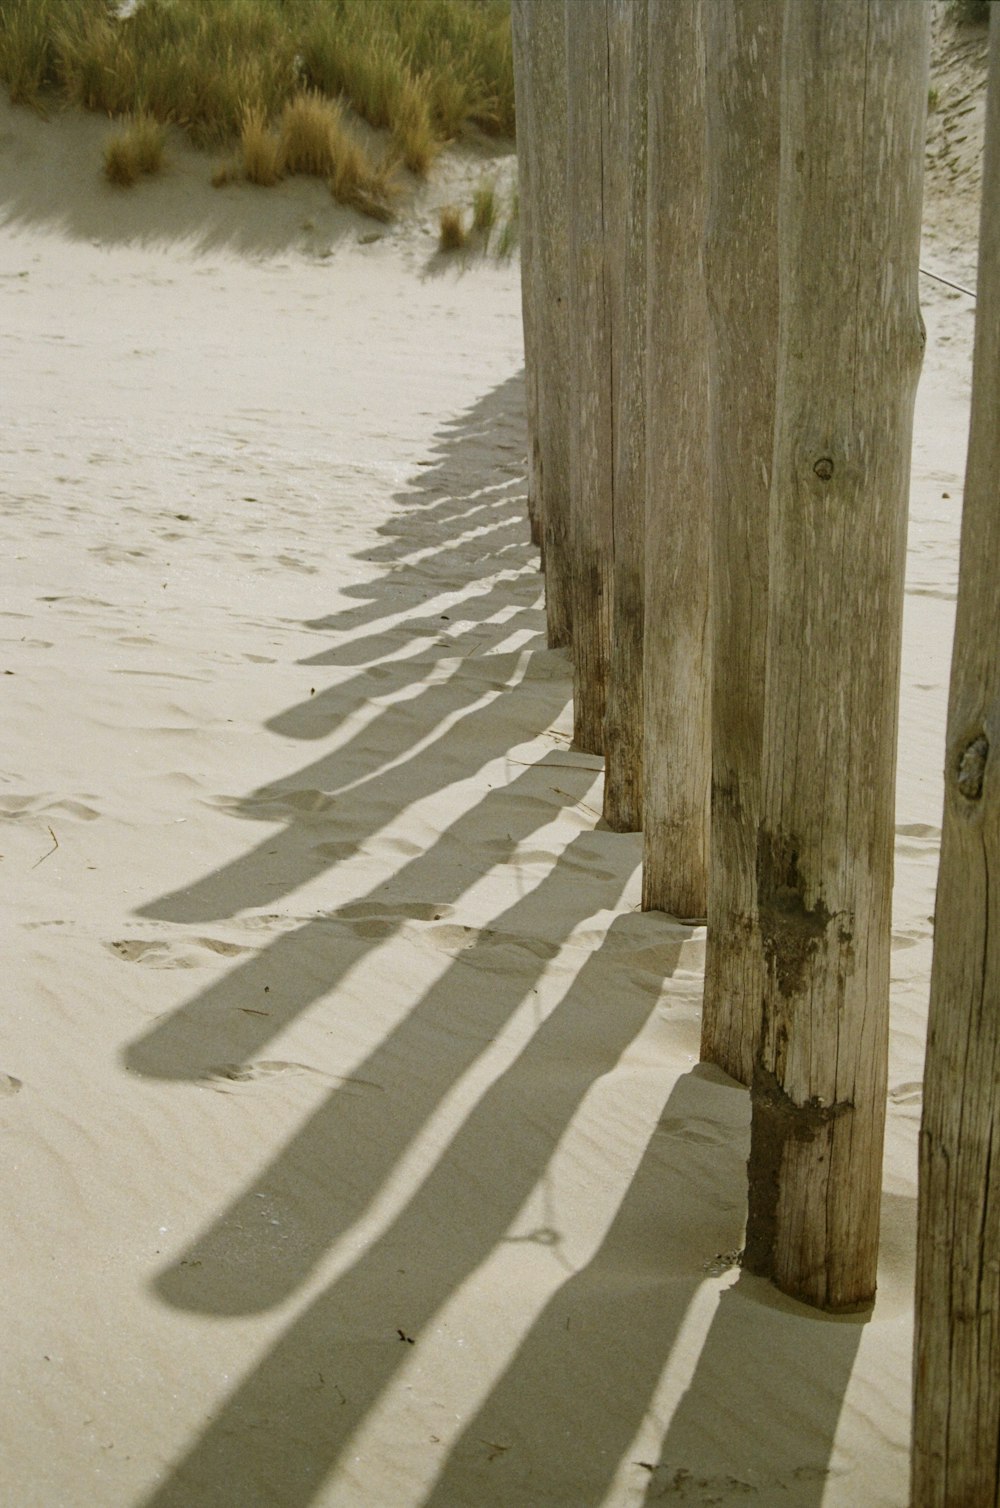 a group of wooden posts on a beach